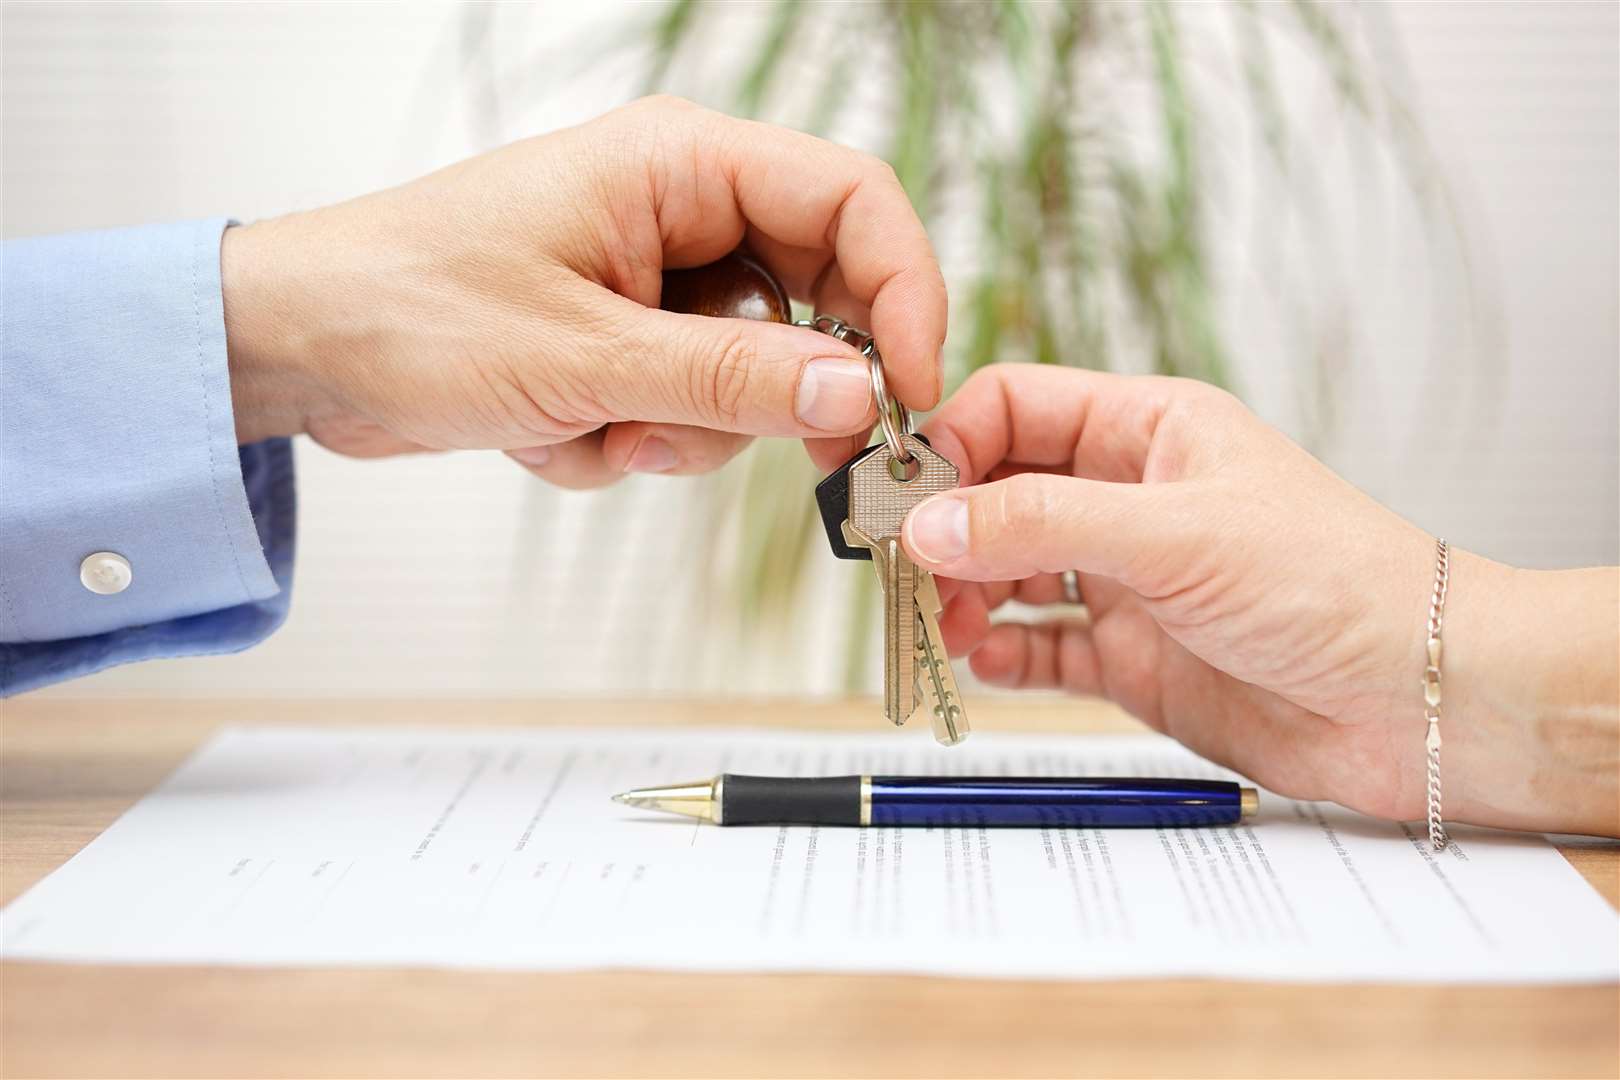 Charlie Bainbridge recommends making a personal connection with a letting agent. Photo: iStock